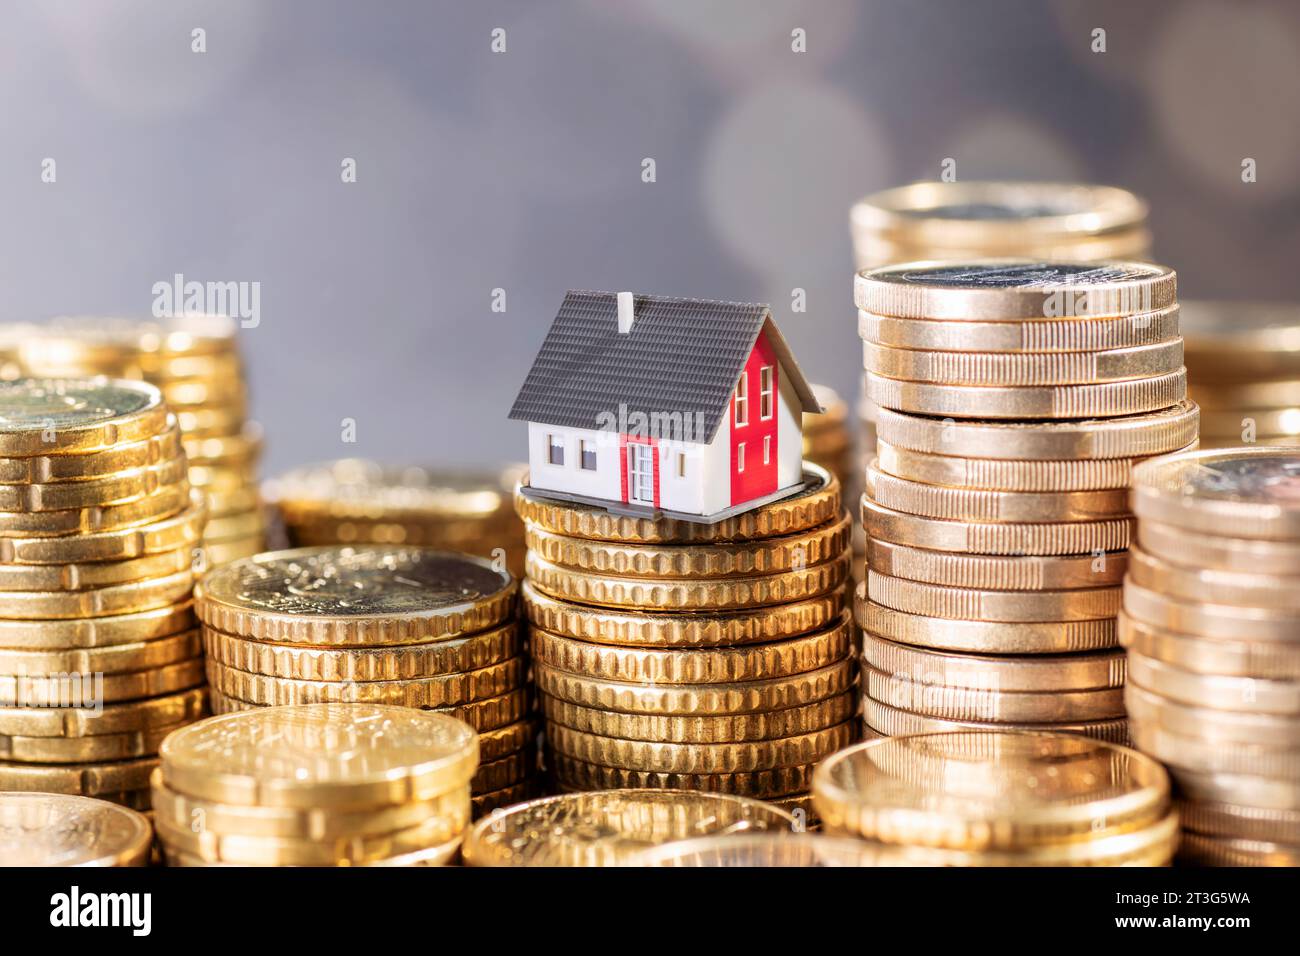 The cost of real estate. House with stacks of coins. Stock Photo